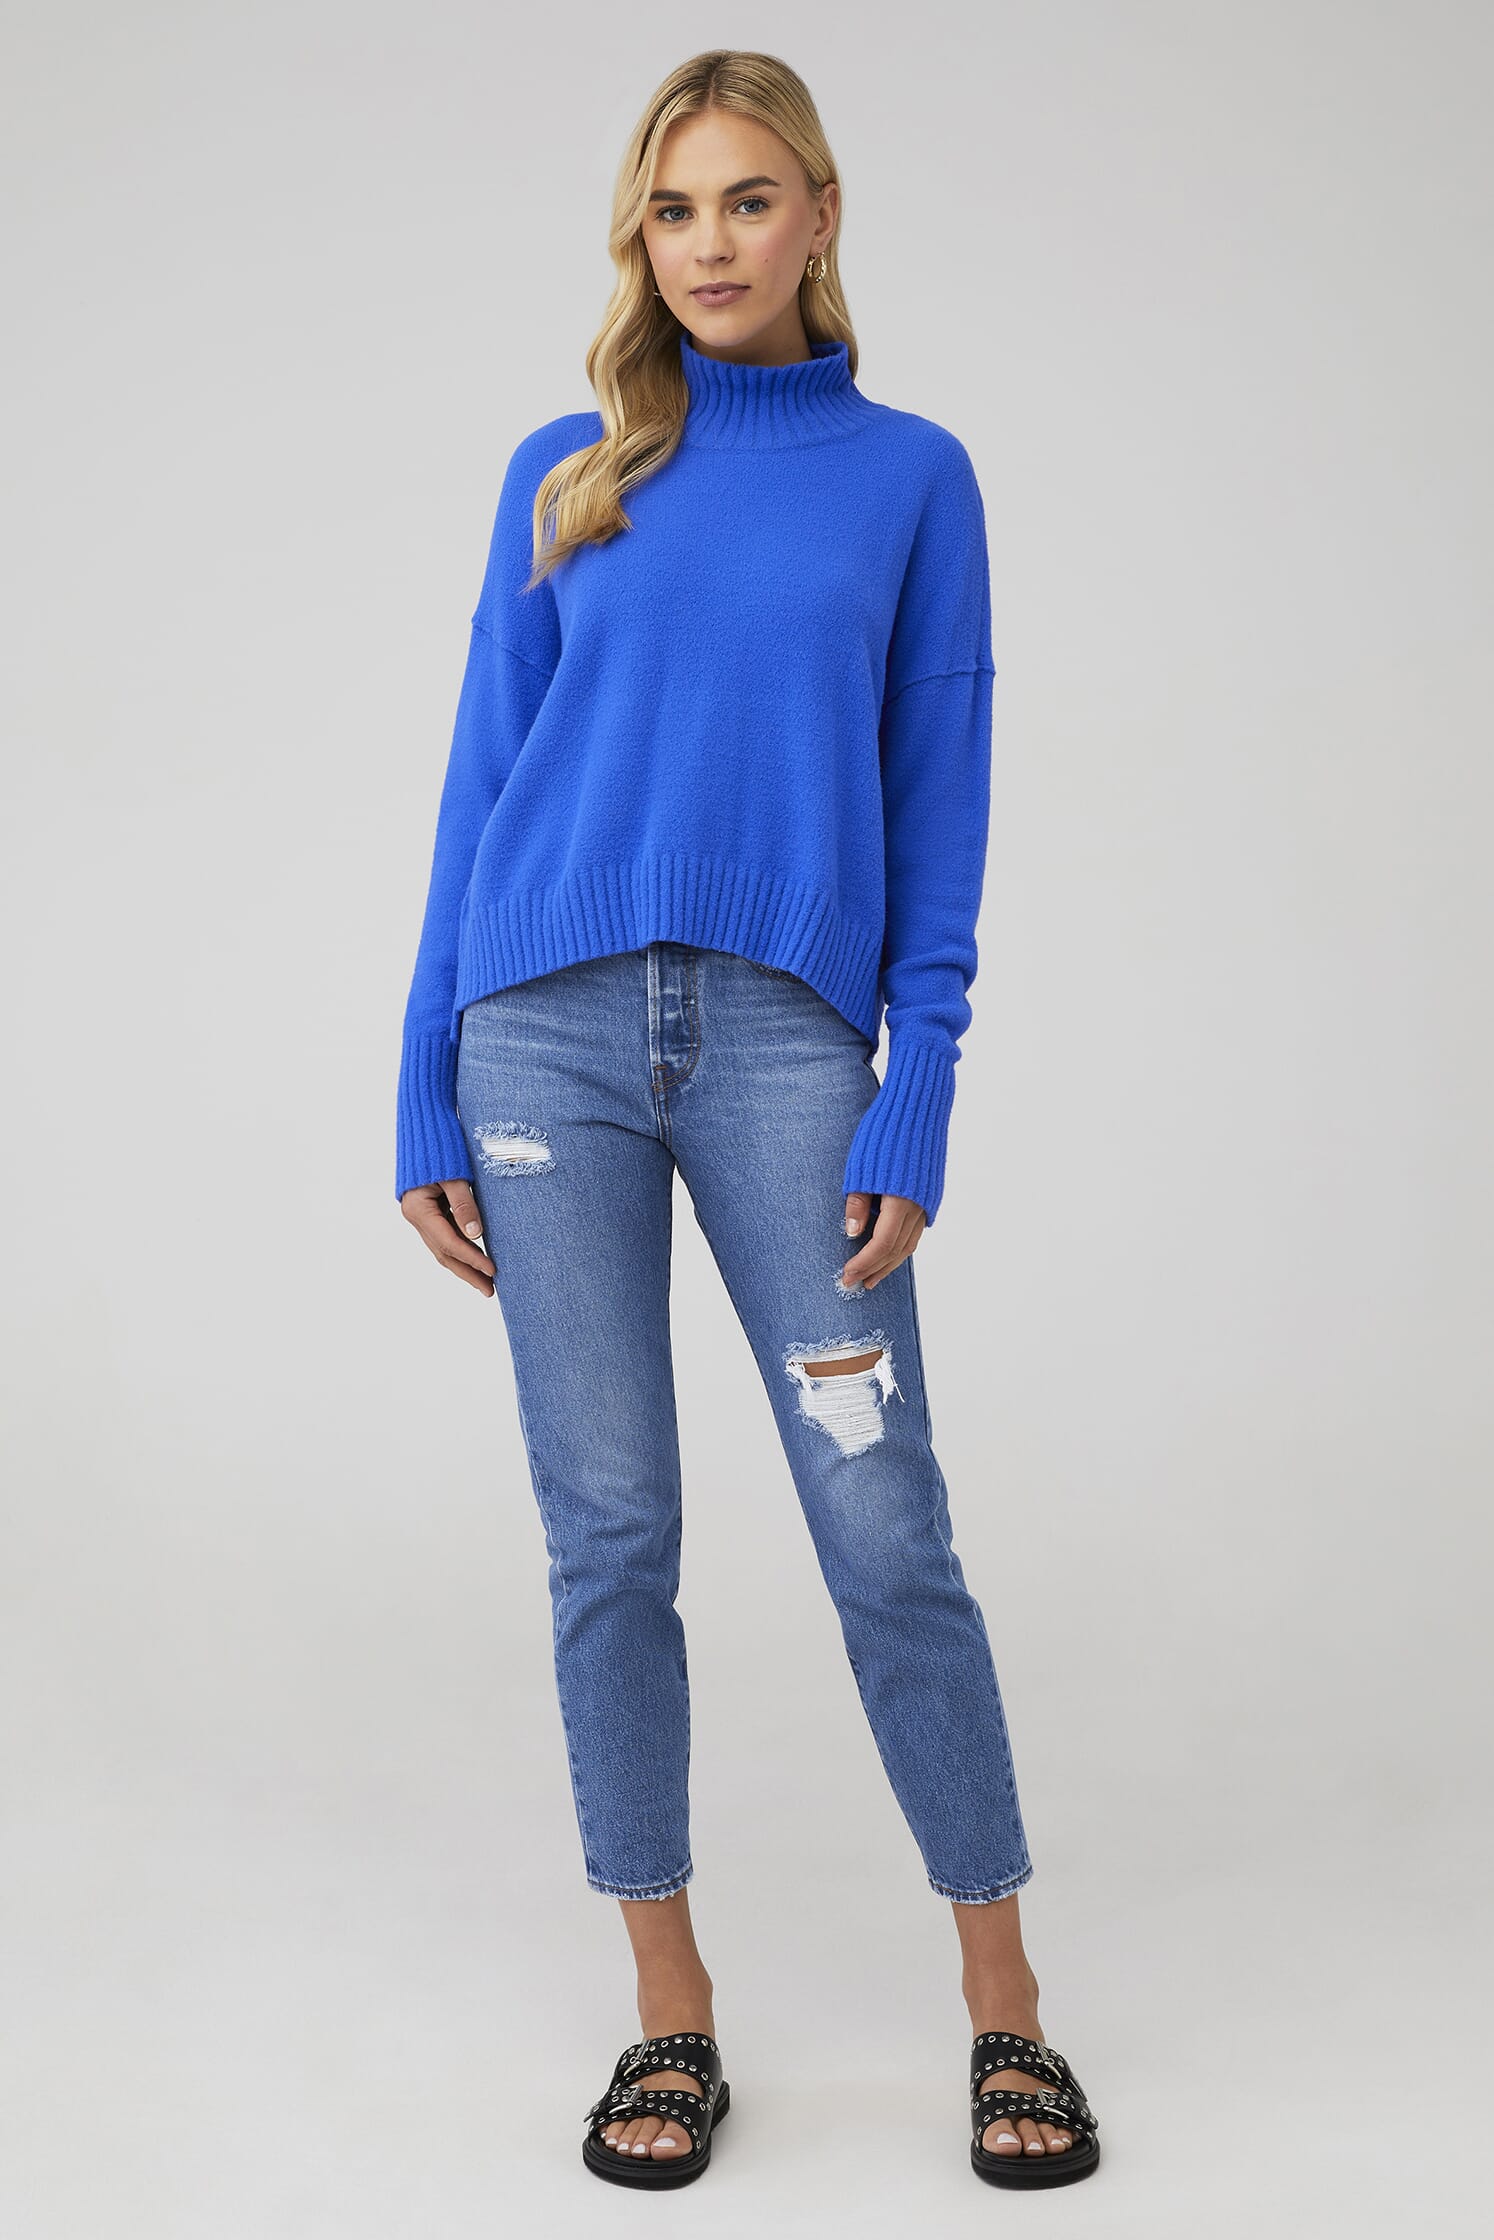 Free People Vancouver Mock Neck Sweater